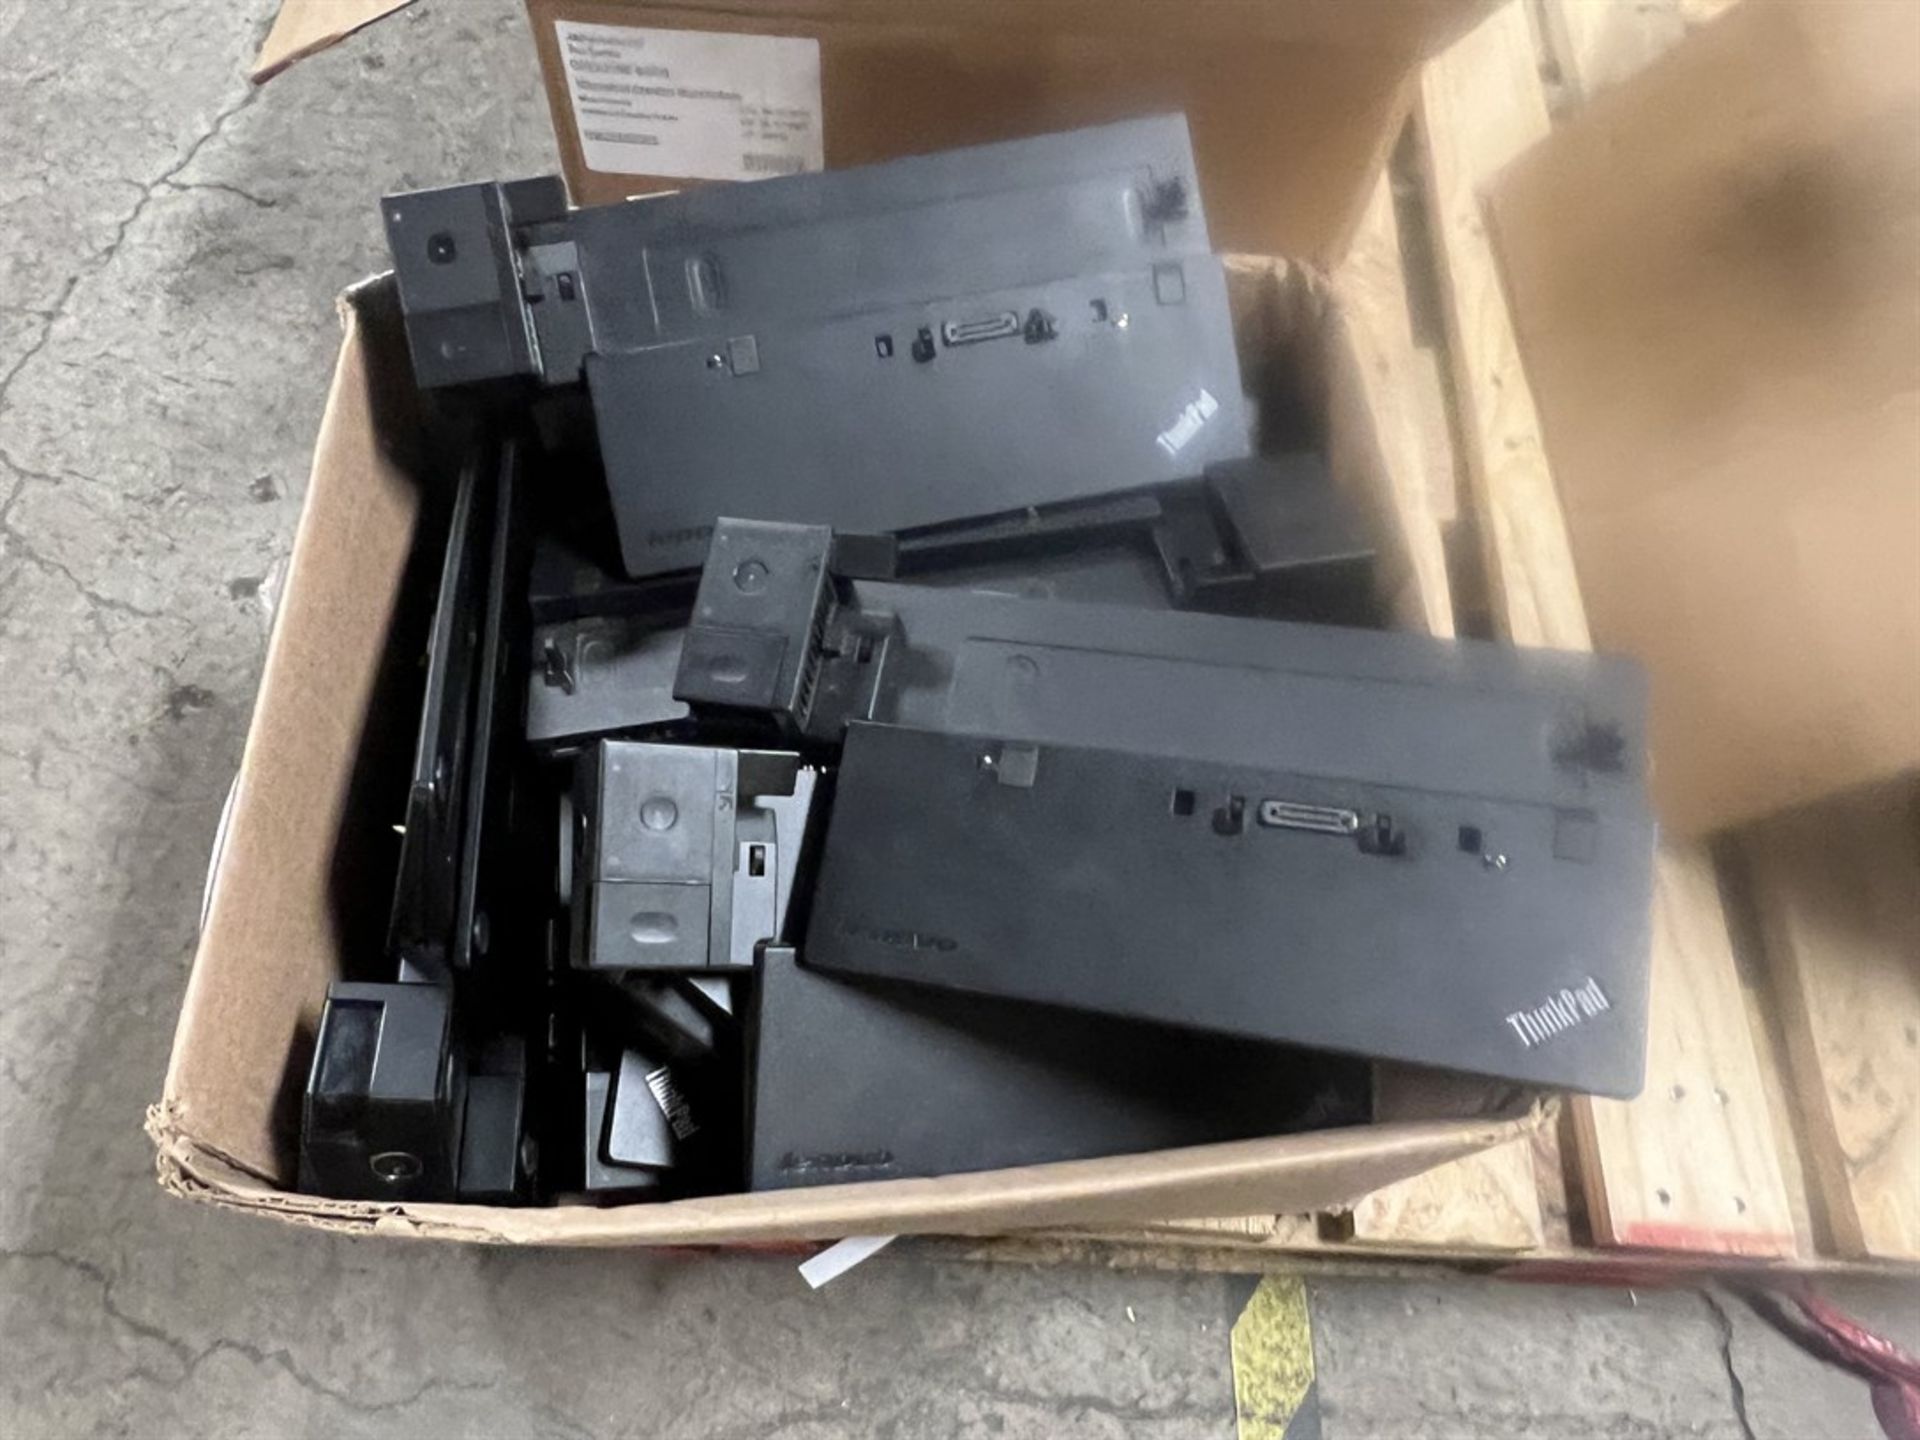 Lot of Assorted Laptops Docking Stations